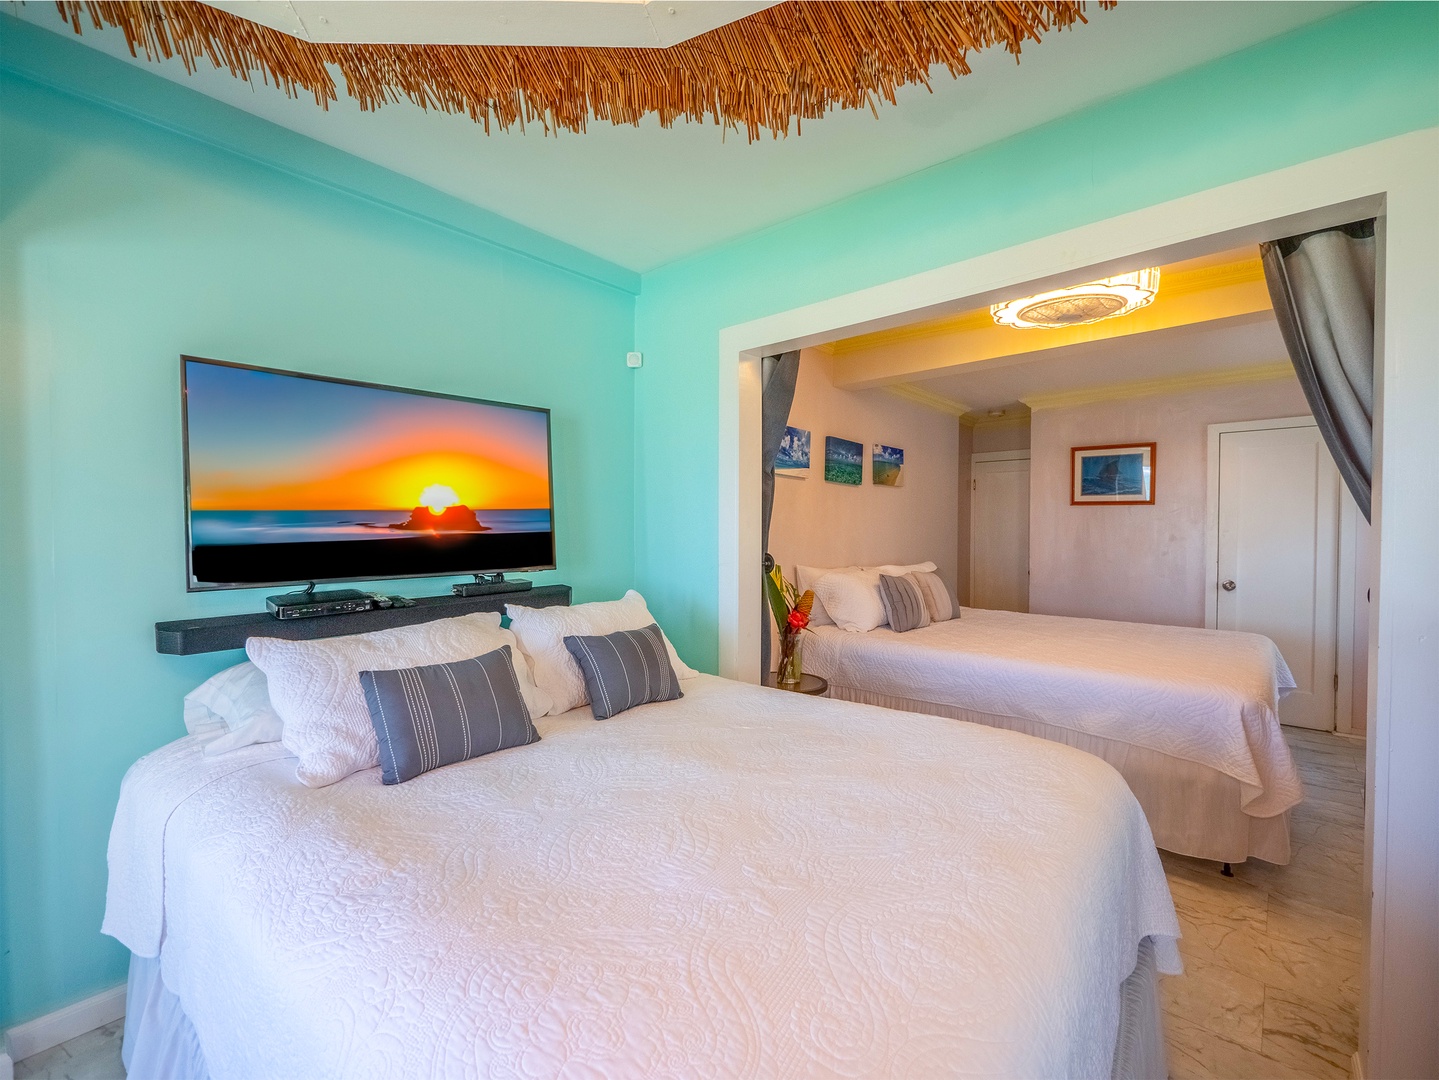 Hauula Vacation Rentals, Paradise Reef Retreat - Coral Suite with two California king-sized beds